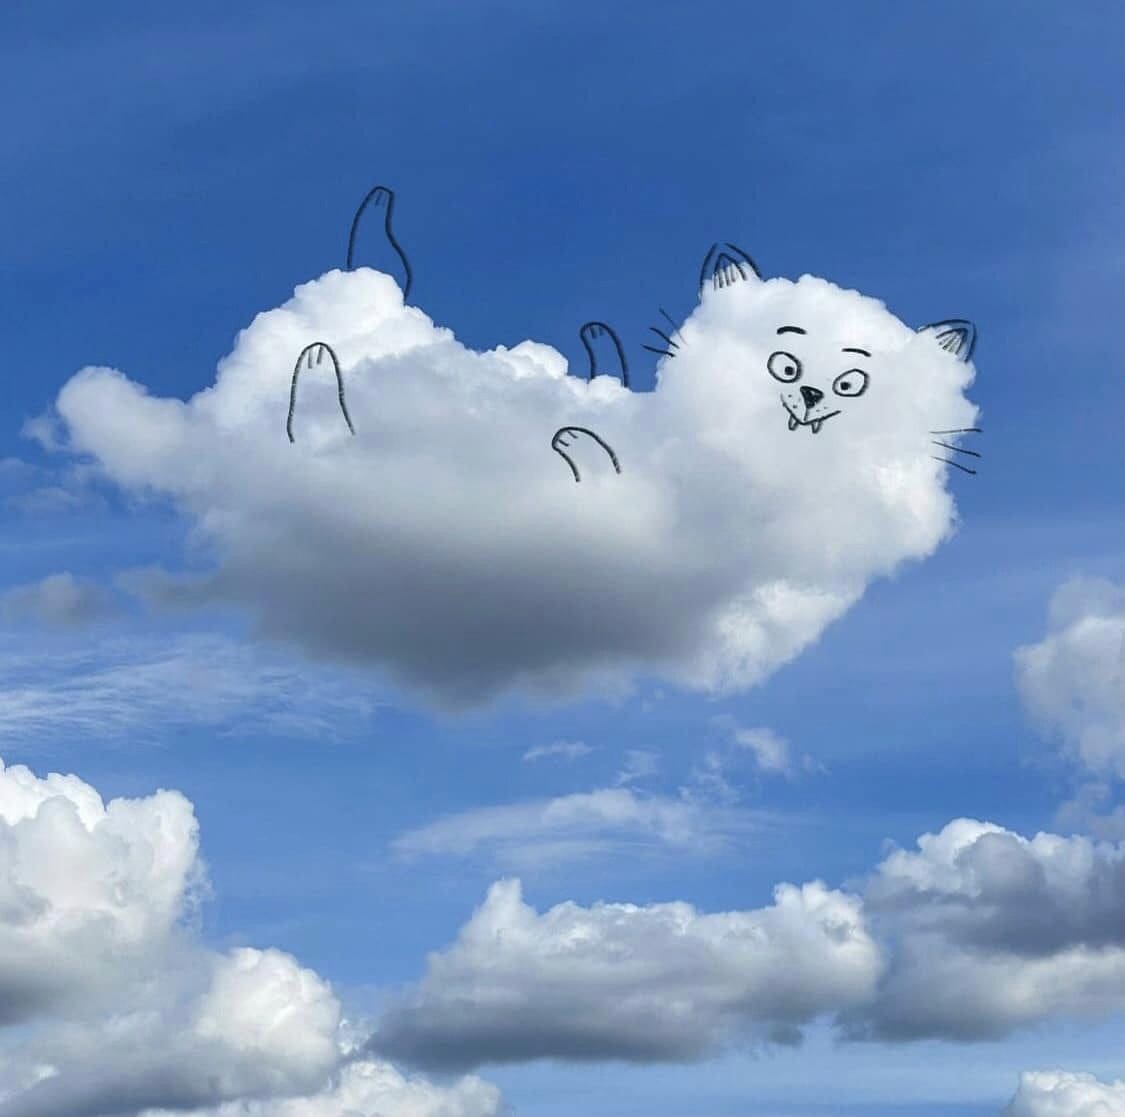 Clouds Turned Into Amusing Characters By Chris Judge (14)